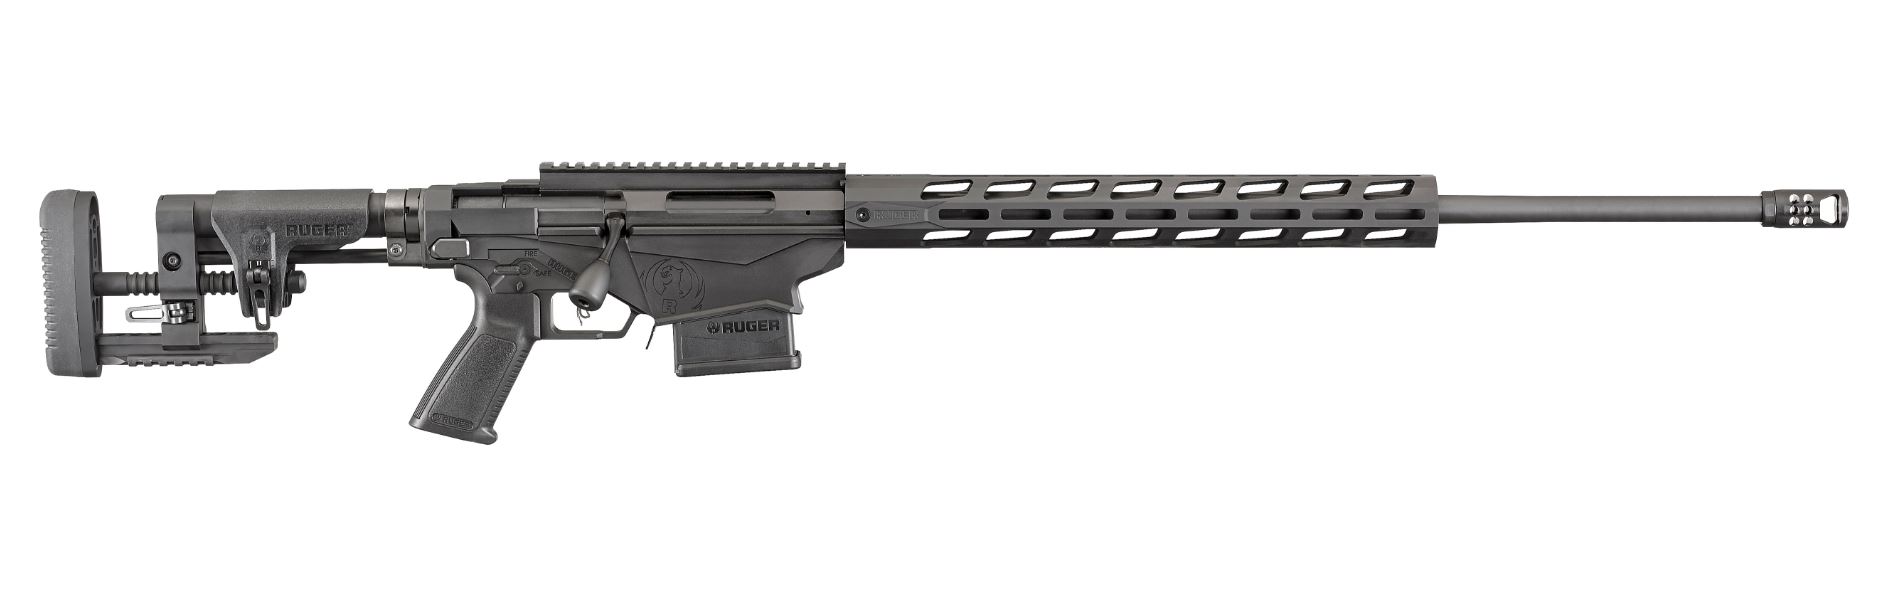 Ruger Precision Rifle 308 Win